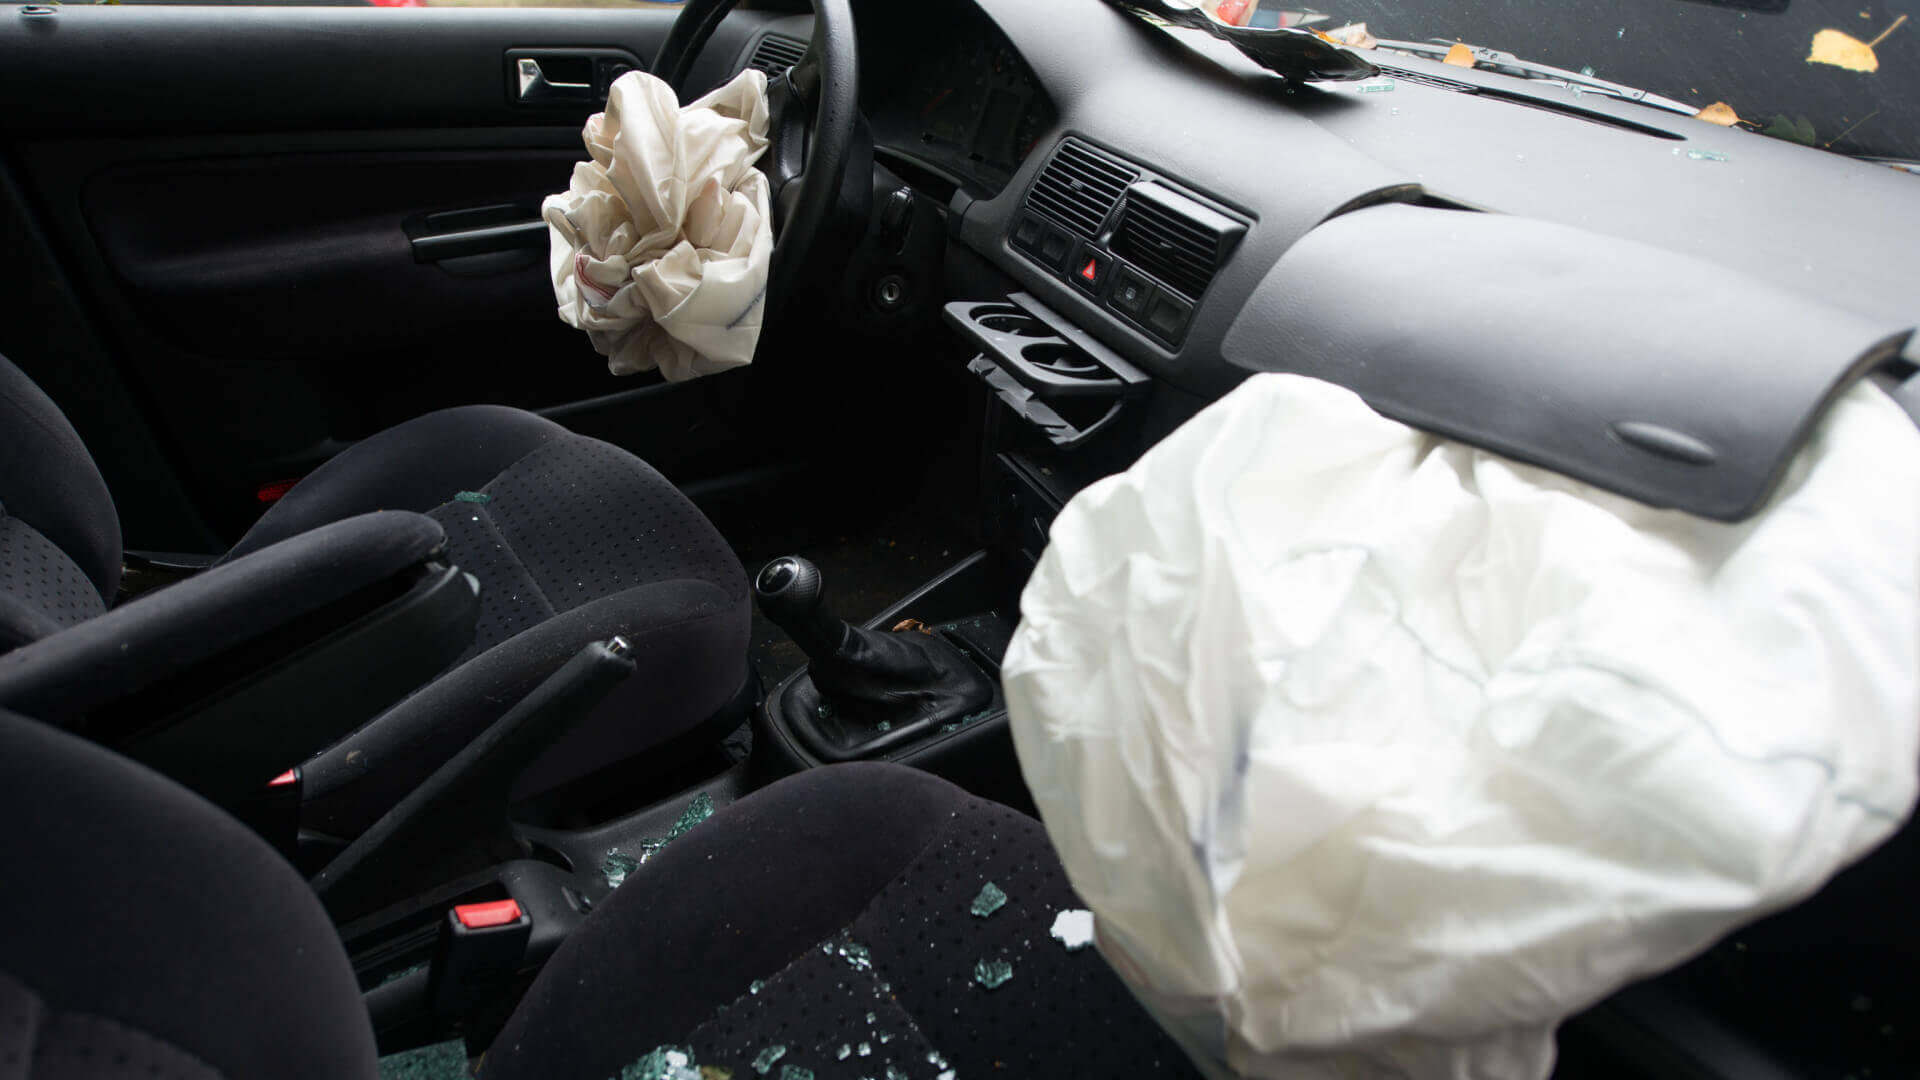 defective airbags that have deployed